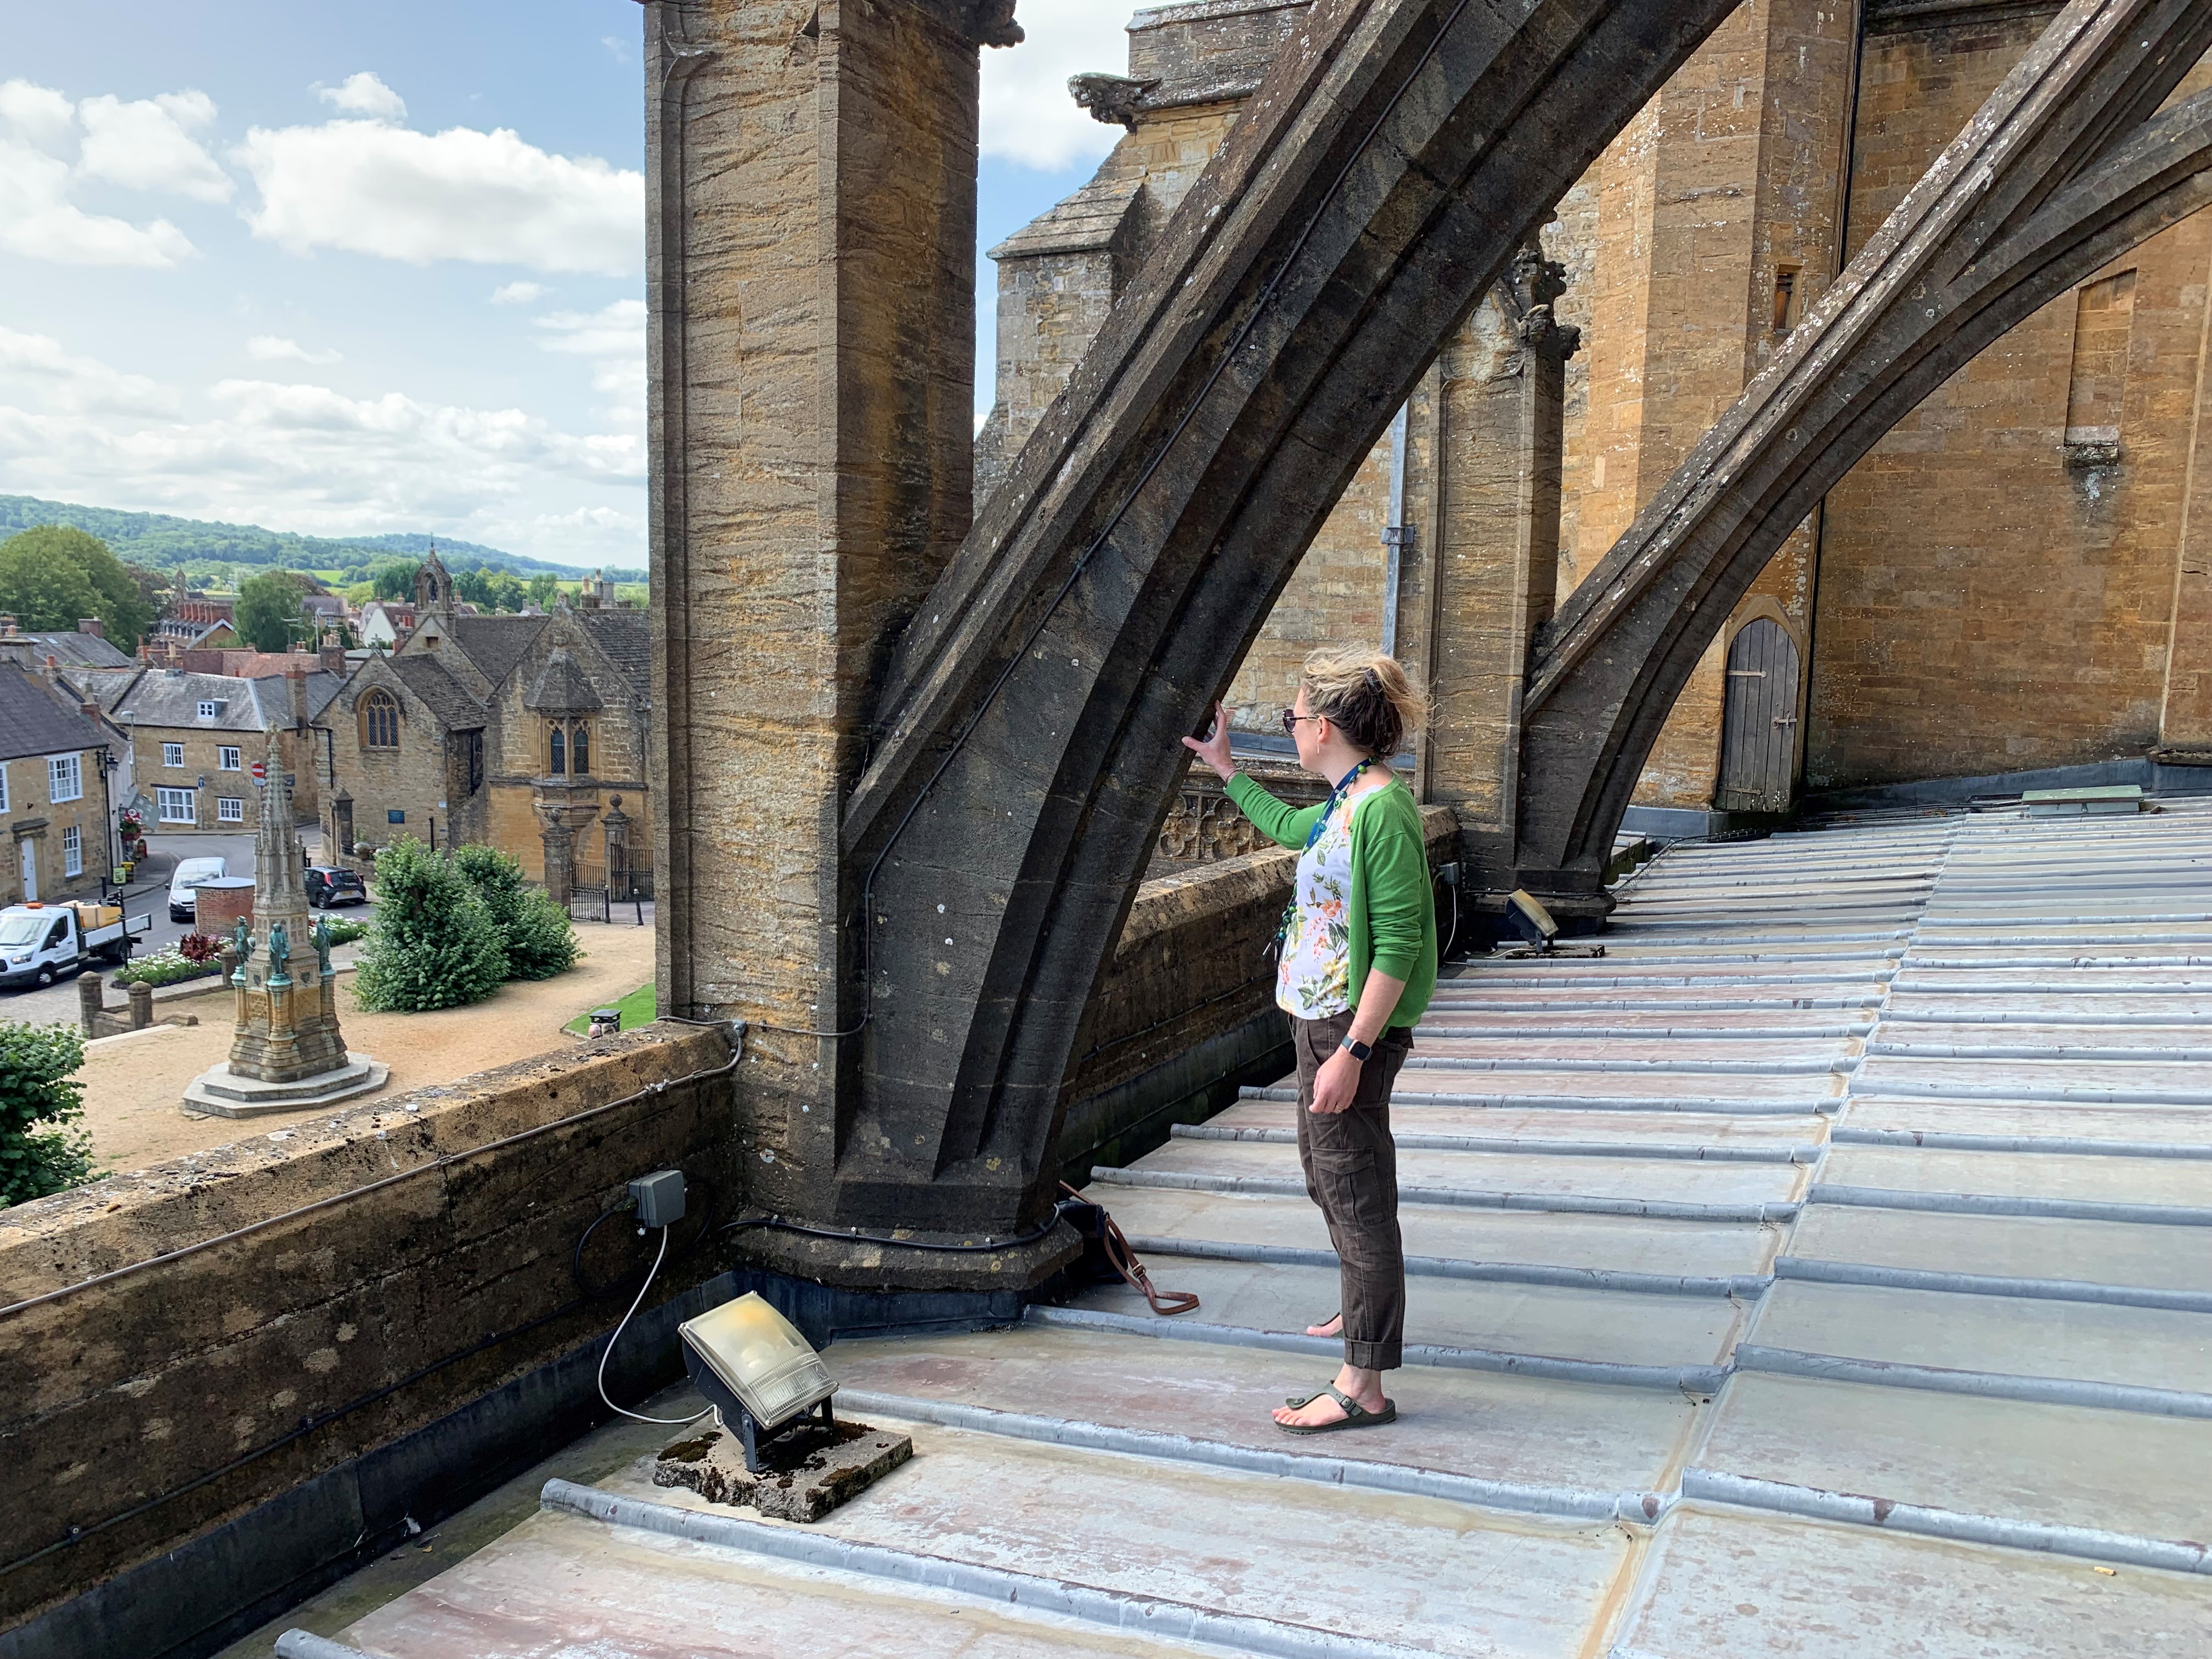 A woman stands on top of Sherborne Abbey roof, touching the stone and looking at the landscape of house roofs below.